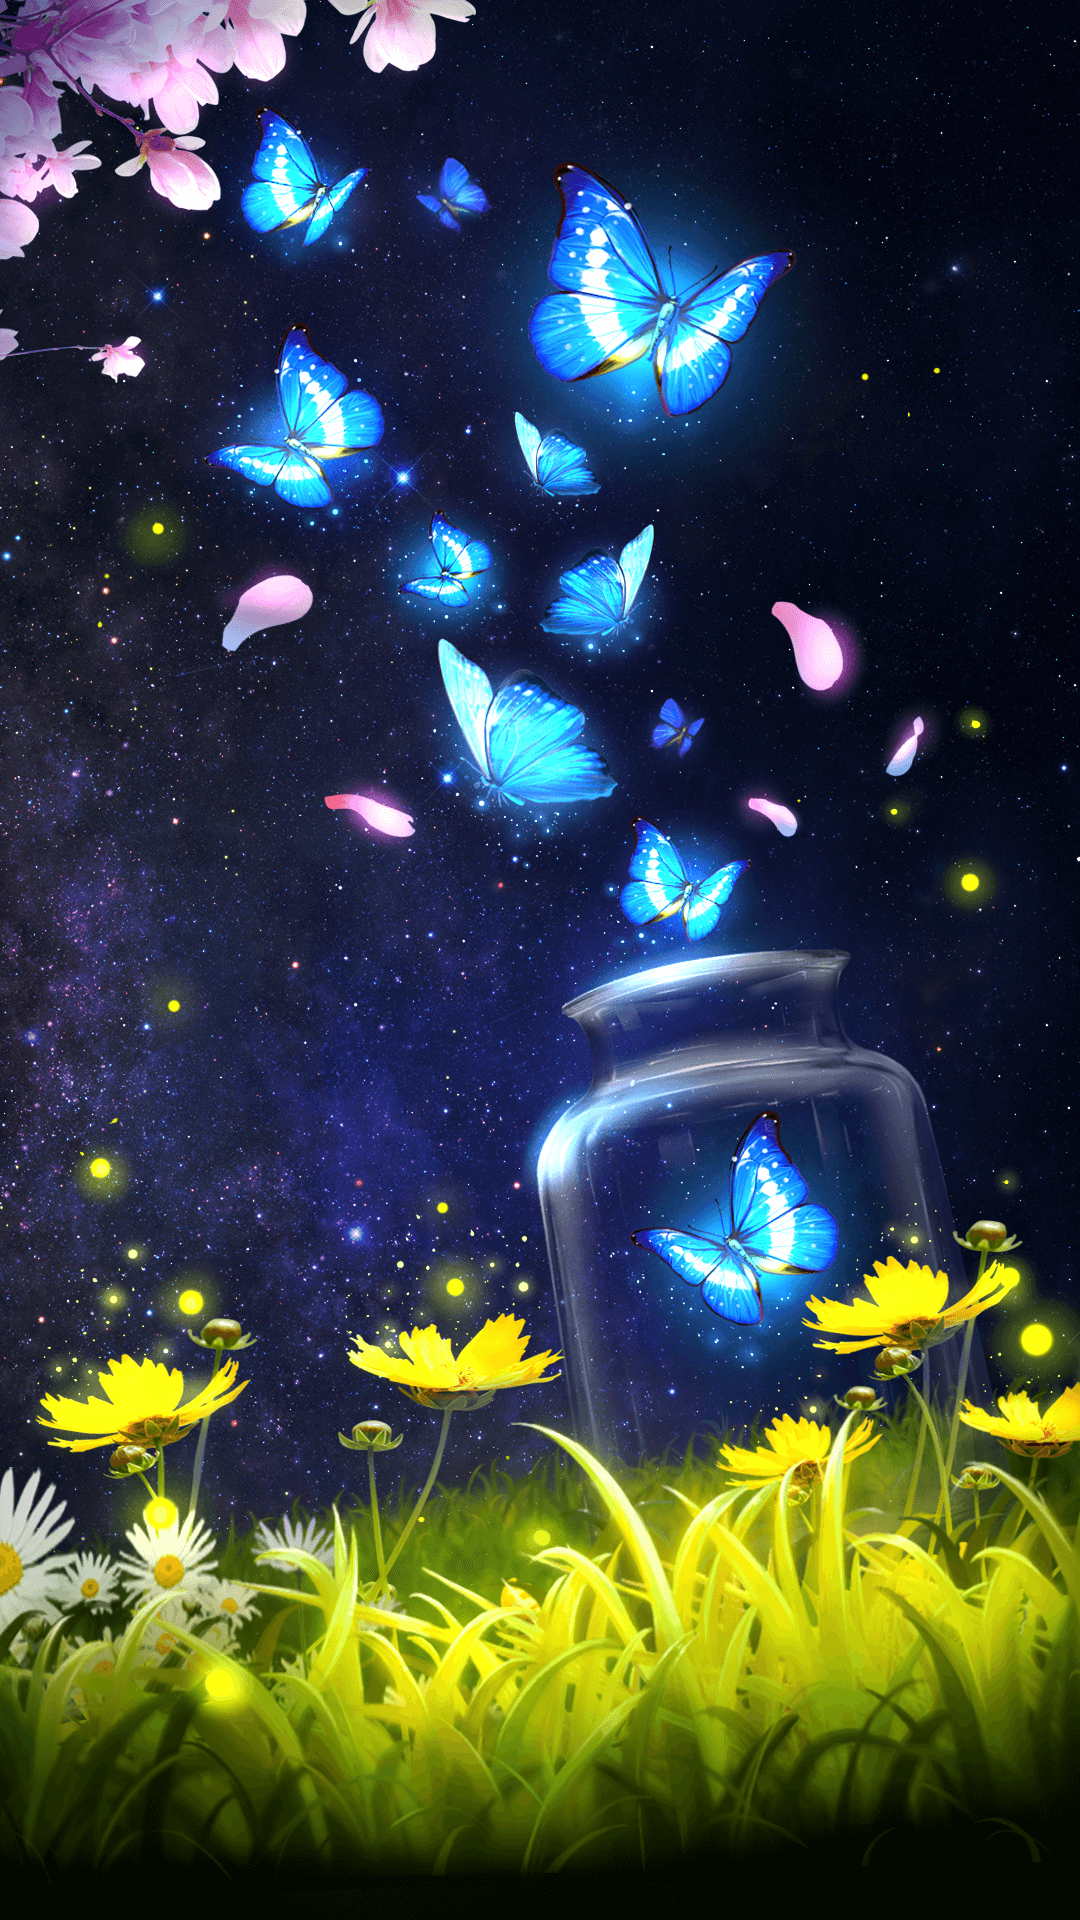 Android Live Wallpaper Background!Shiny Blue Butterfly Live Wallpaper With Starry S. Papel De Parede Borboletas, Papel De Parede De Arte, Papel De Parede Colorido